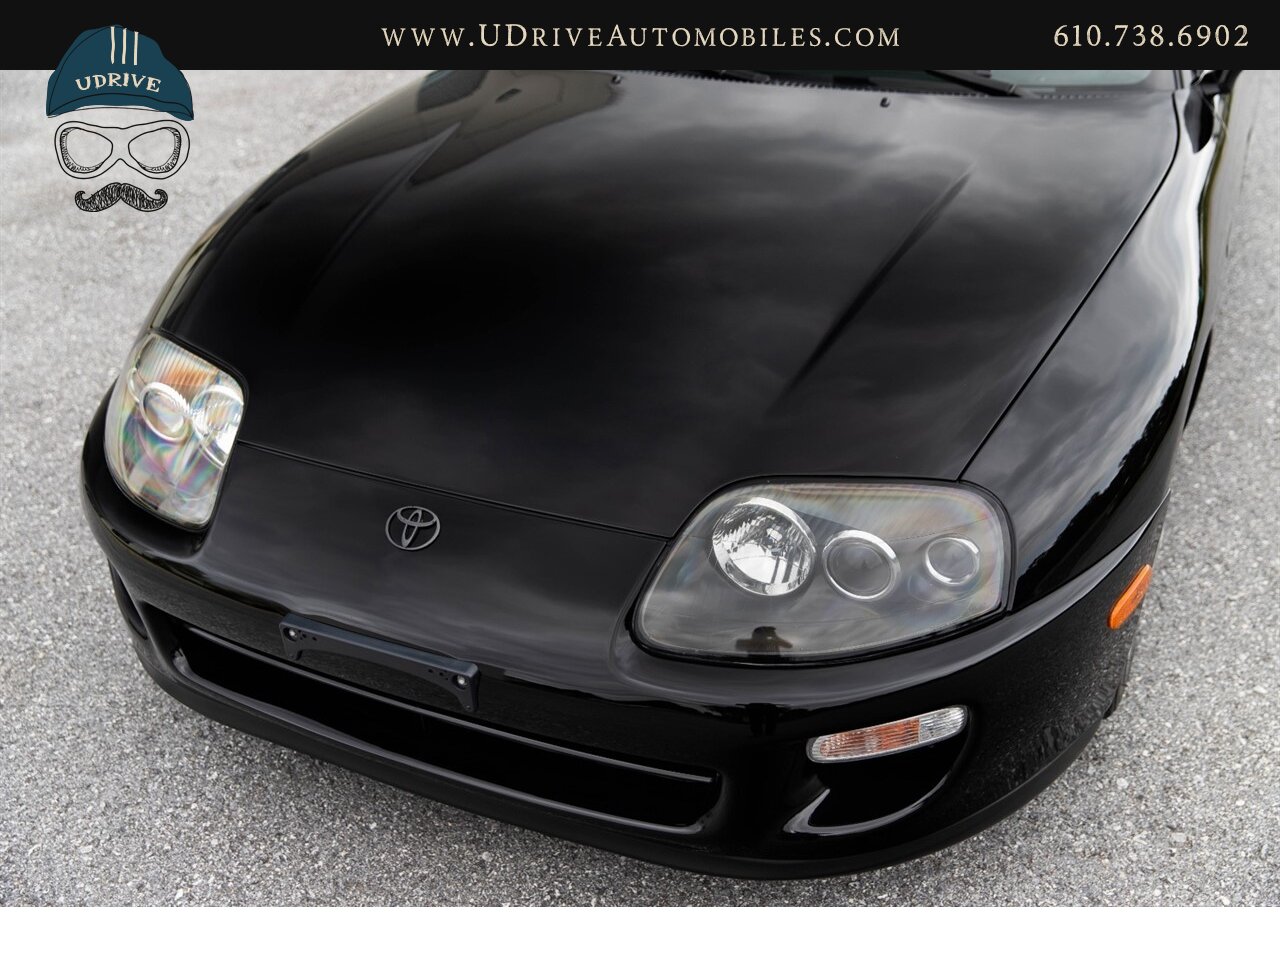 1997 Toyota Supra Turbo 6 Speed Manual 15th Anniversary Edition   - Photo 13 - West Chester, PA 19382